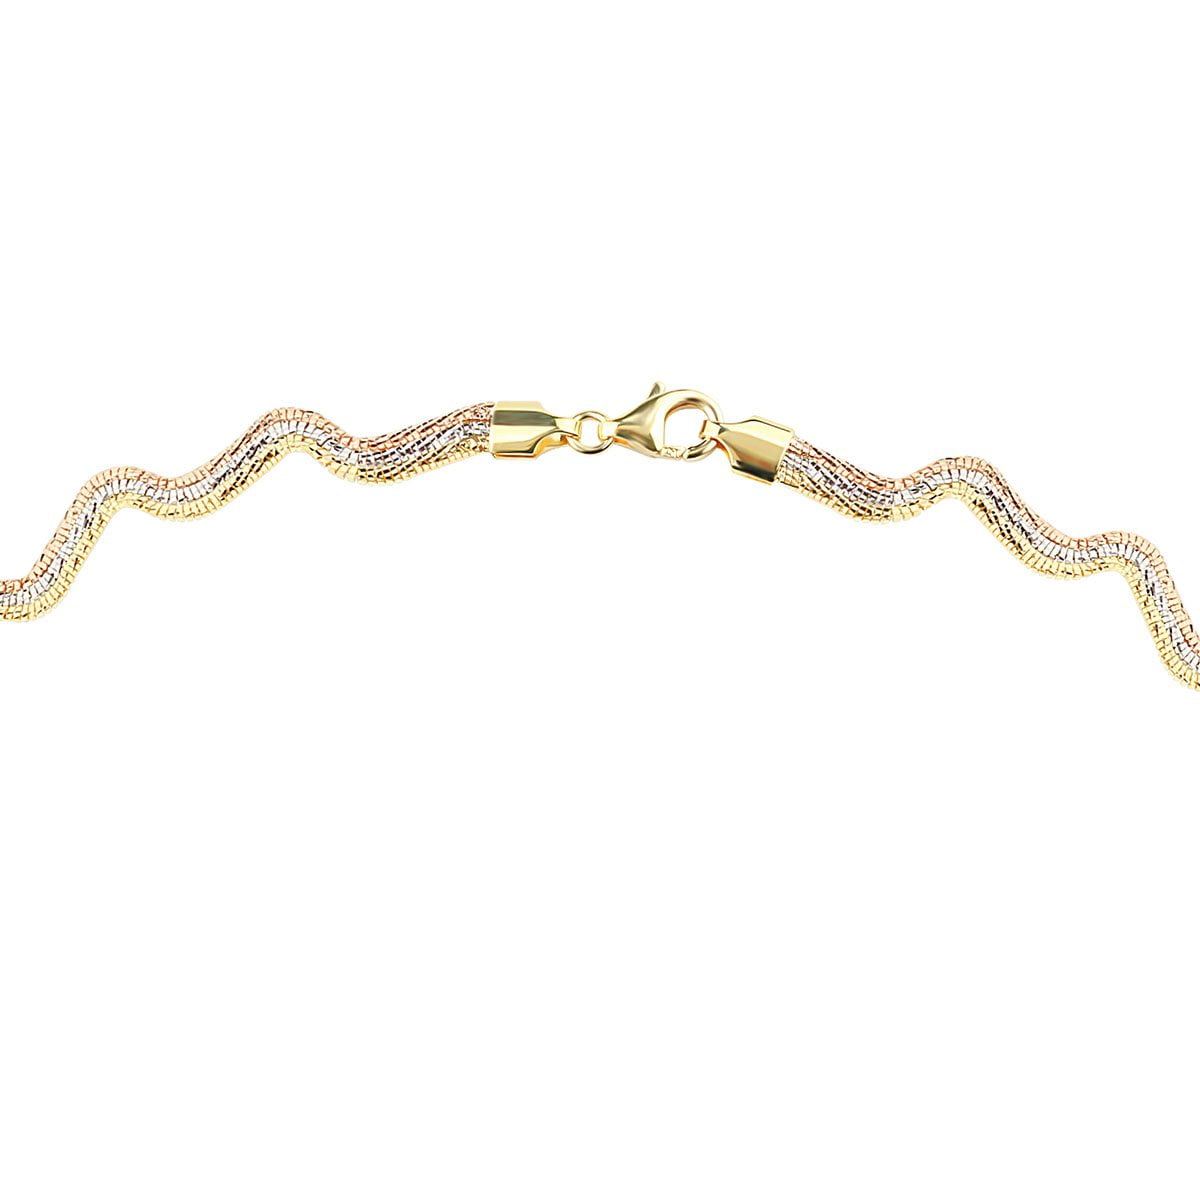 18ct White, Rose & Yellow Gold Choker Necklace